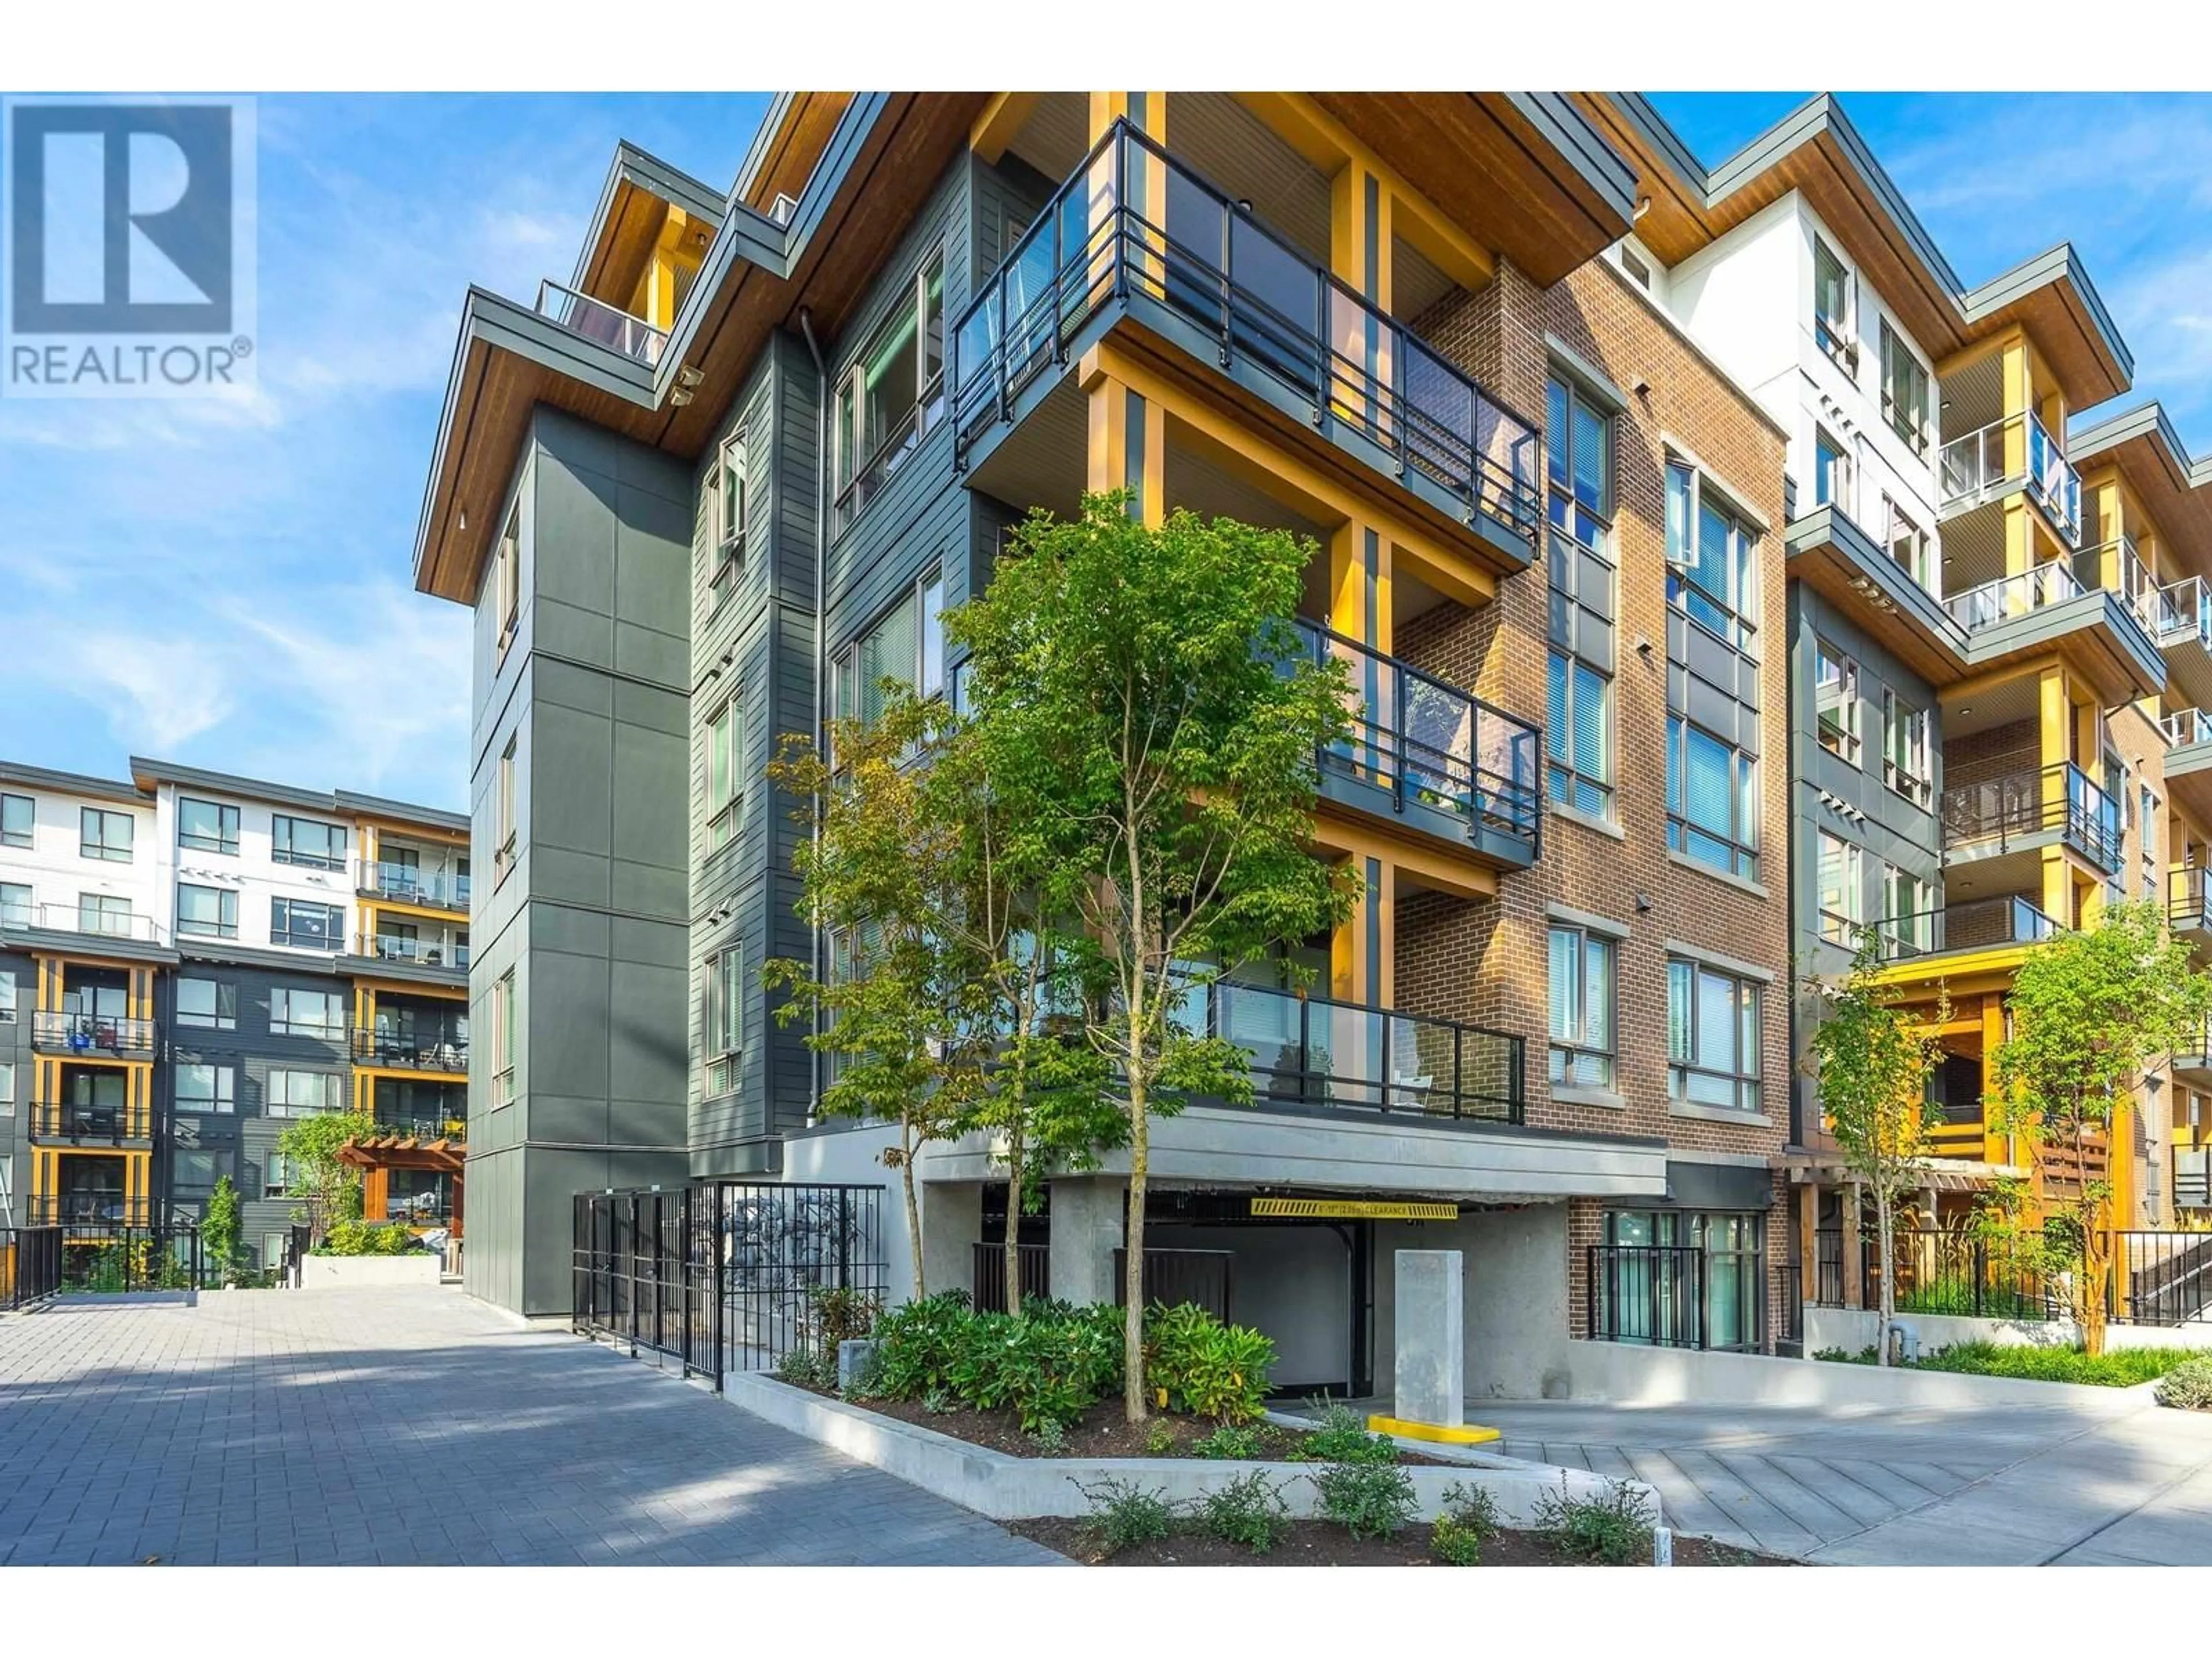 A pic from exterior of the house or condo for 321 735 ANSKAR COURT, Coquitlam British Columbia V3J0L7